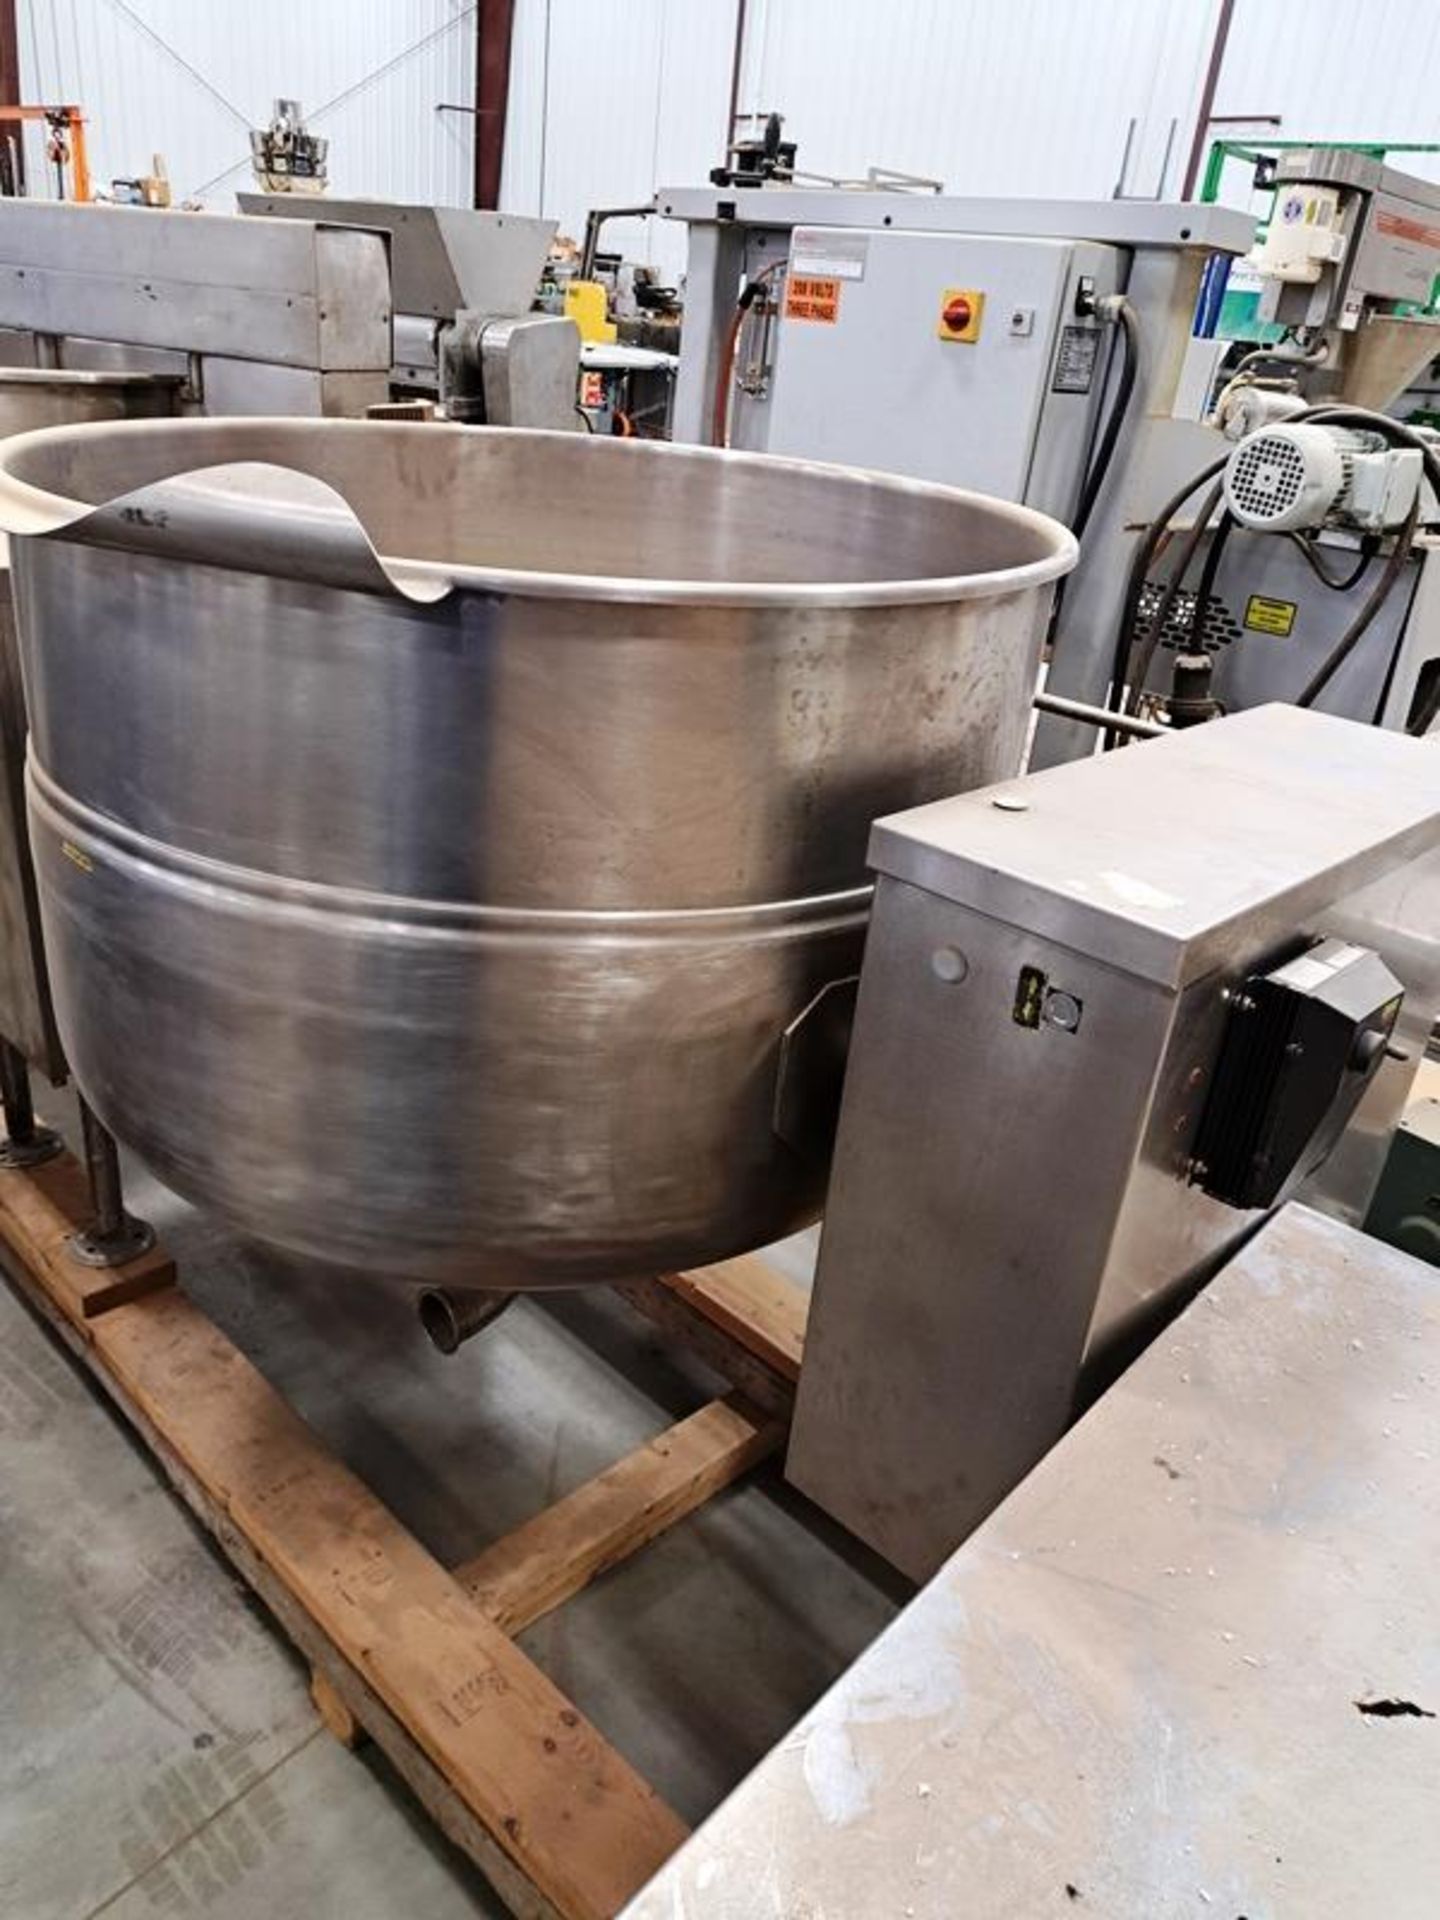 Cleveland Mdl. TMKD-125T Double Stainless Steel Kettles, 2/3 jacketed, (1) with mixer and side - Image 5 of 13